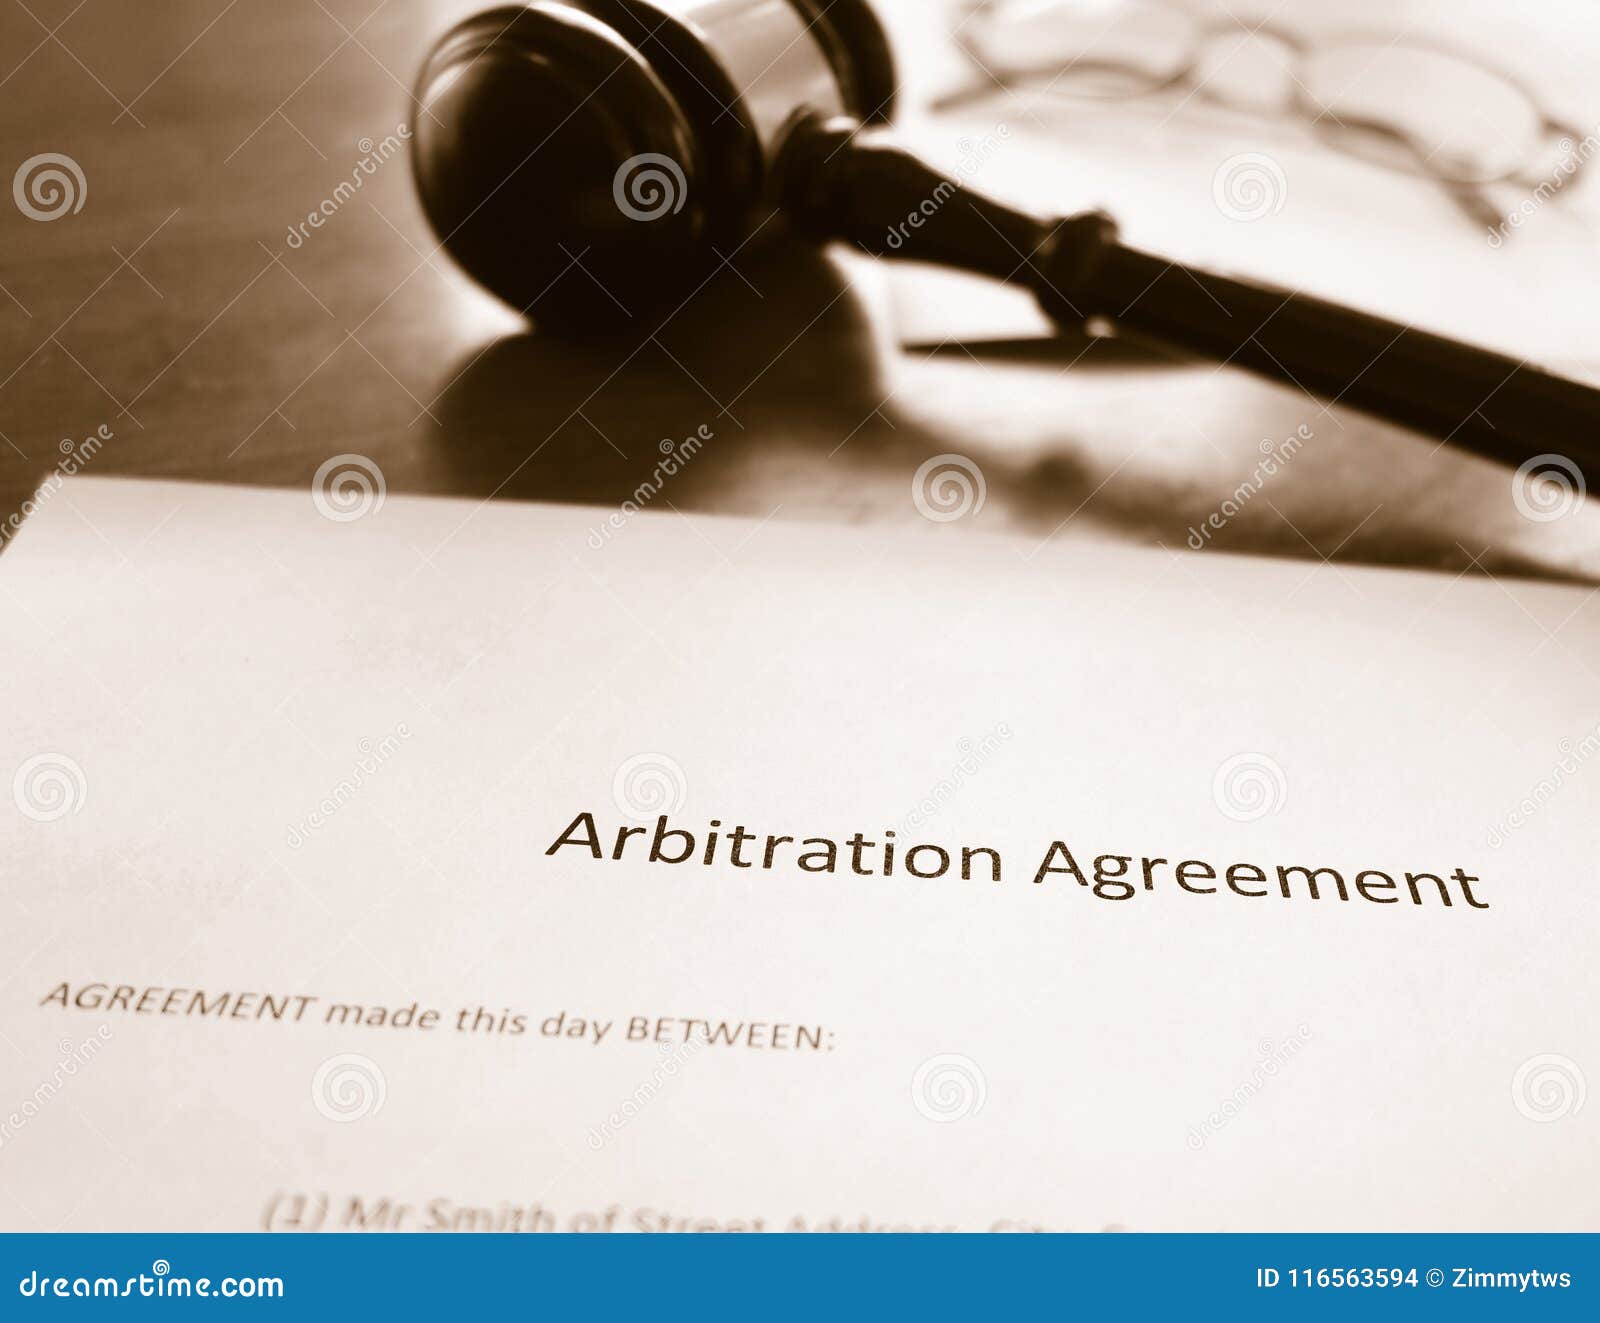 arbitration agreement and gavel